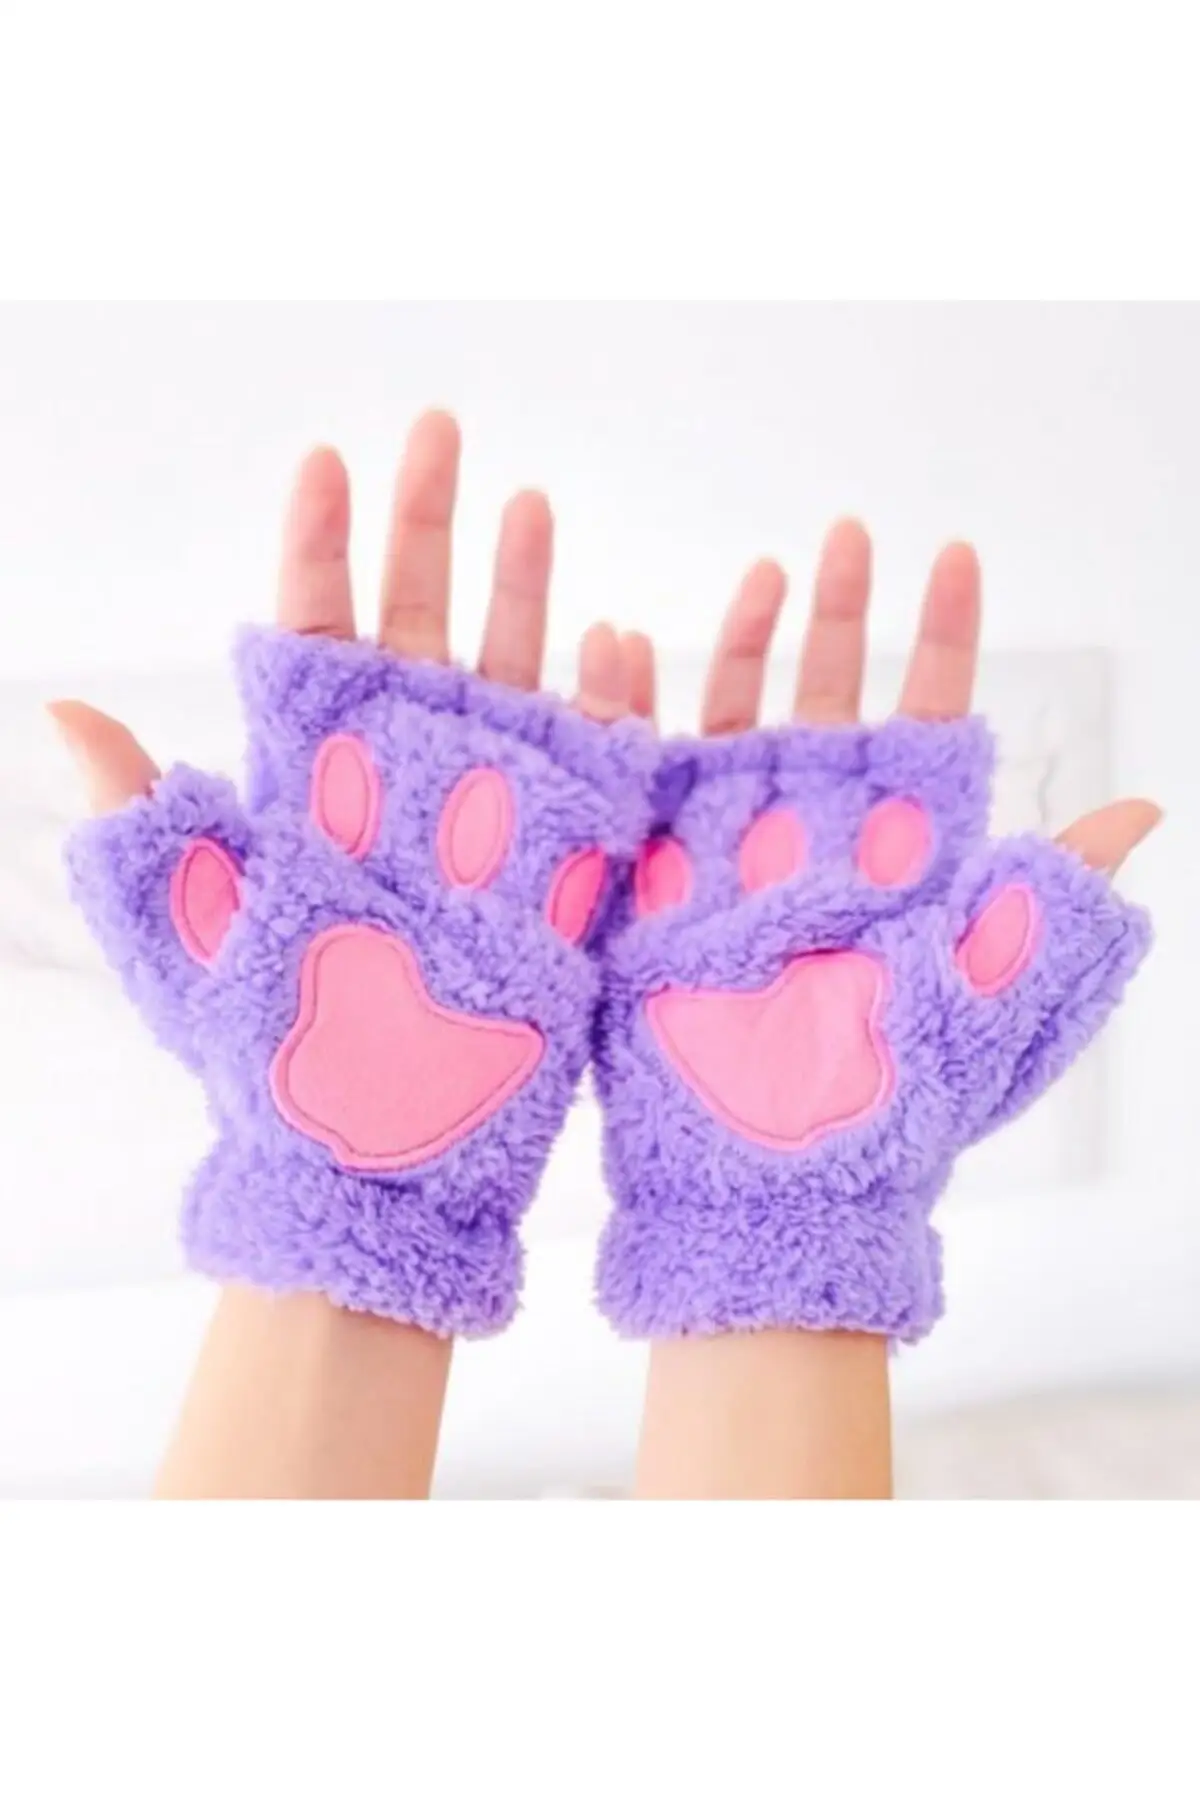 wool paw gloves for women, winter women's products, warm accessories, fingerless gloves